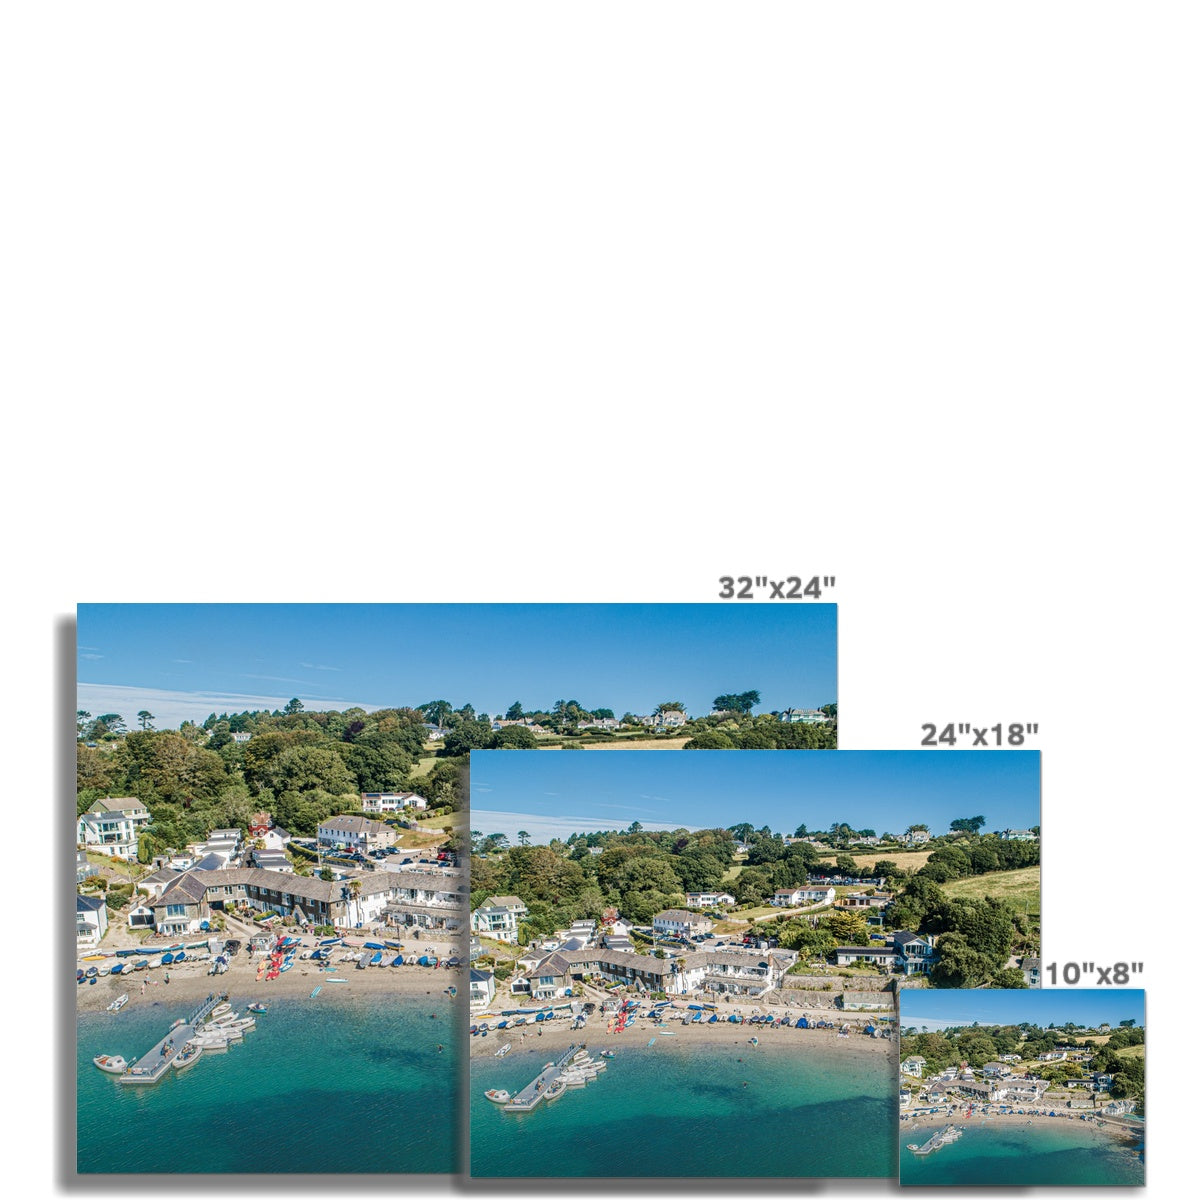 helford beach picture sizes